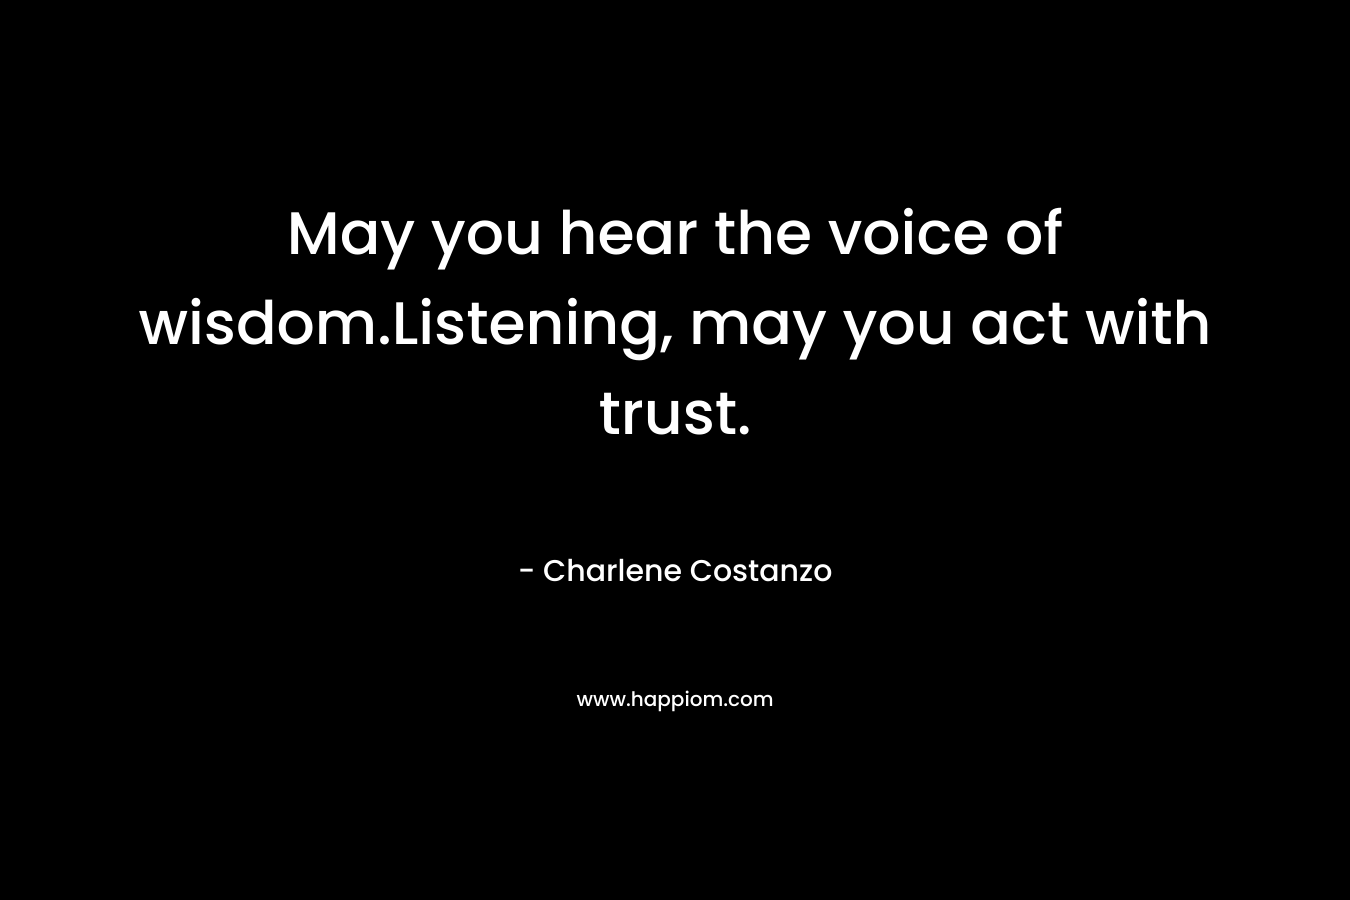 May you hear the voice of wisdom.Listening, may you act with trust.